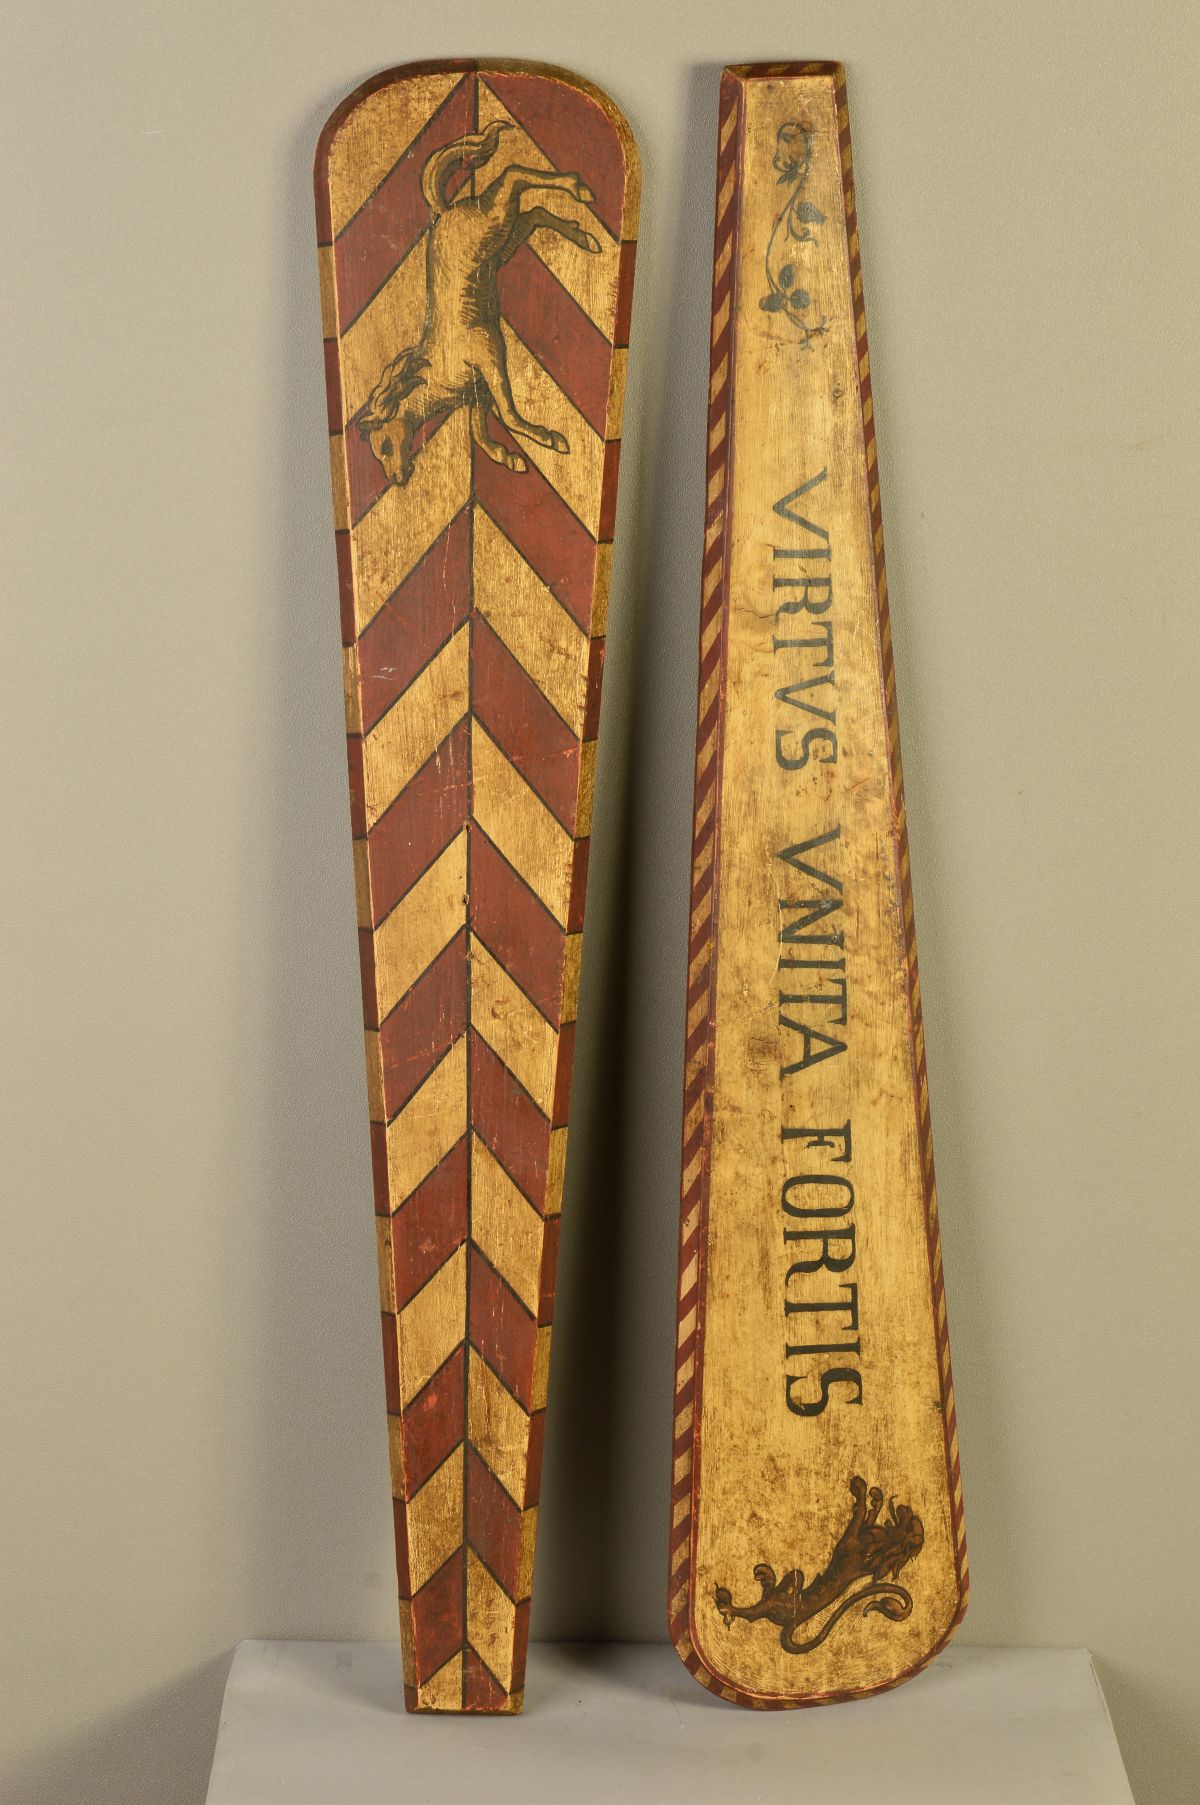 TWO ELONGATED PAINTED WOODEN PANELS, one with red and white chevrons with a rearing horse, the other